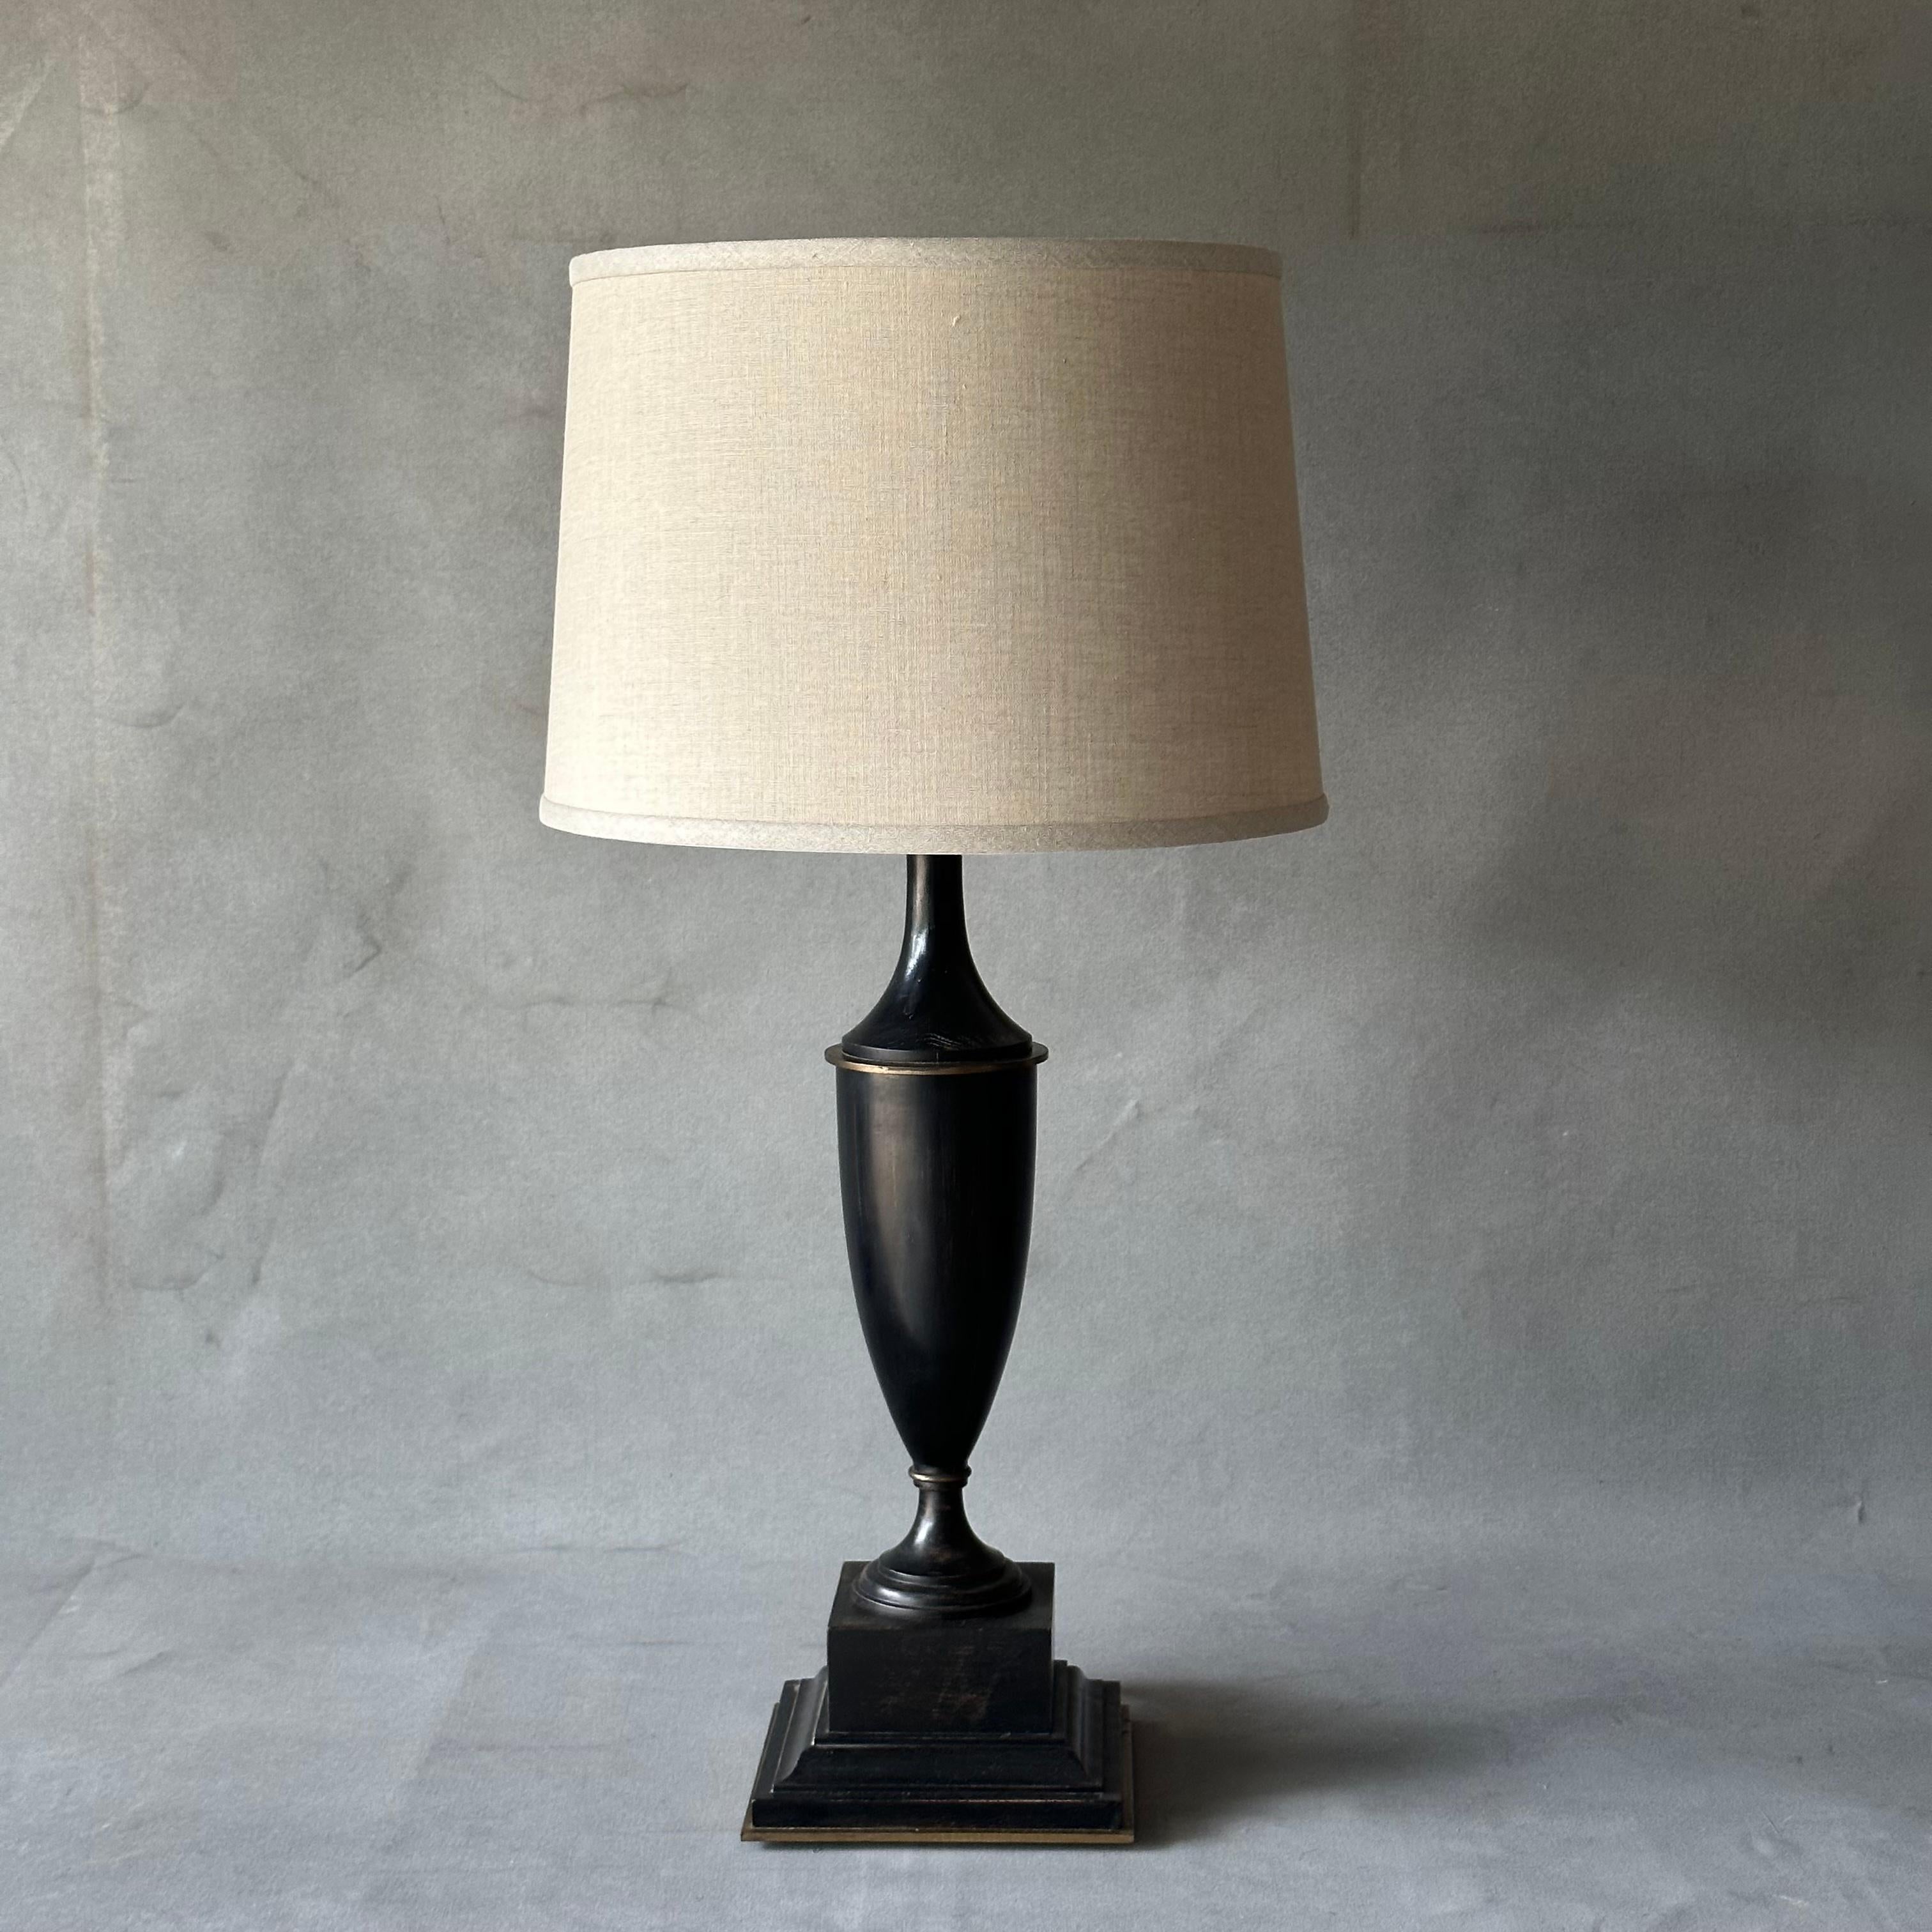 Neoclassical urn-shaped black ebonized table lamp with custom linen shade from late 19th century France. Like a Classical Greek urn, this handsome, traditional piece exudes stoic dignity.

France, circa 1900

Dimensions: 15W x 15D x 32H.